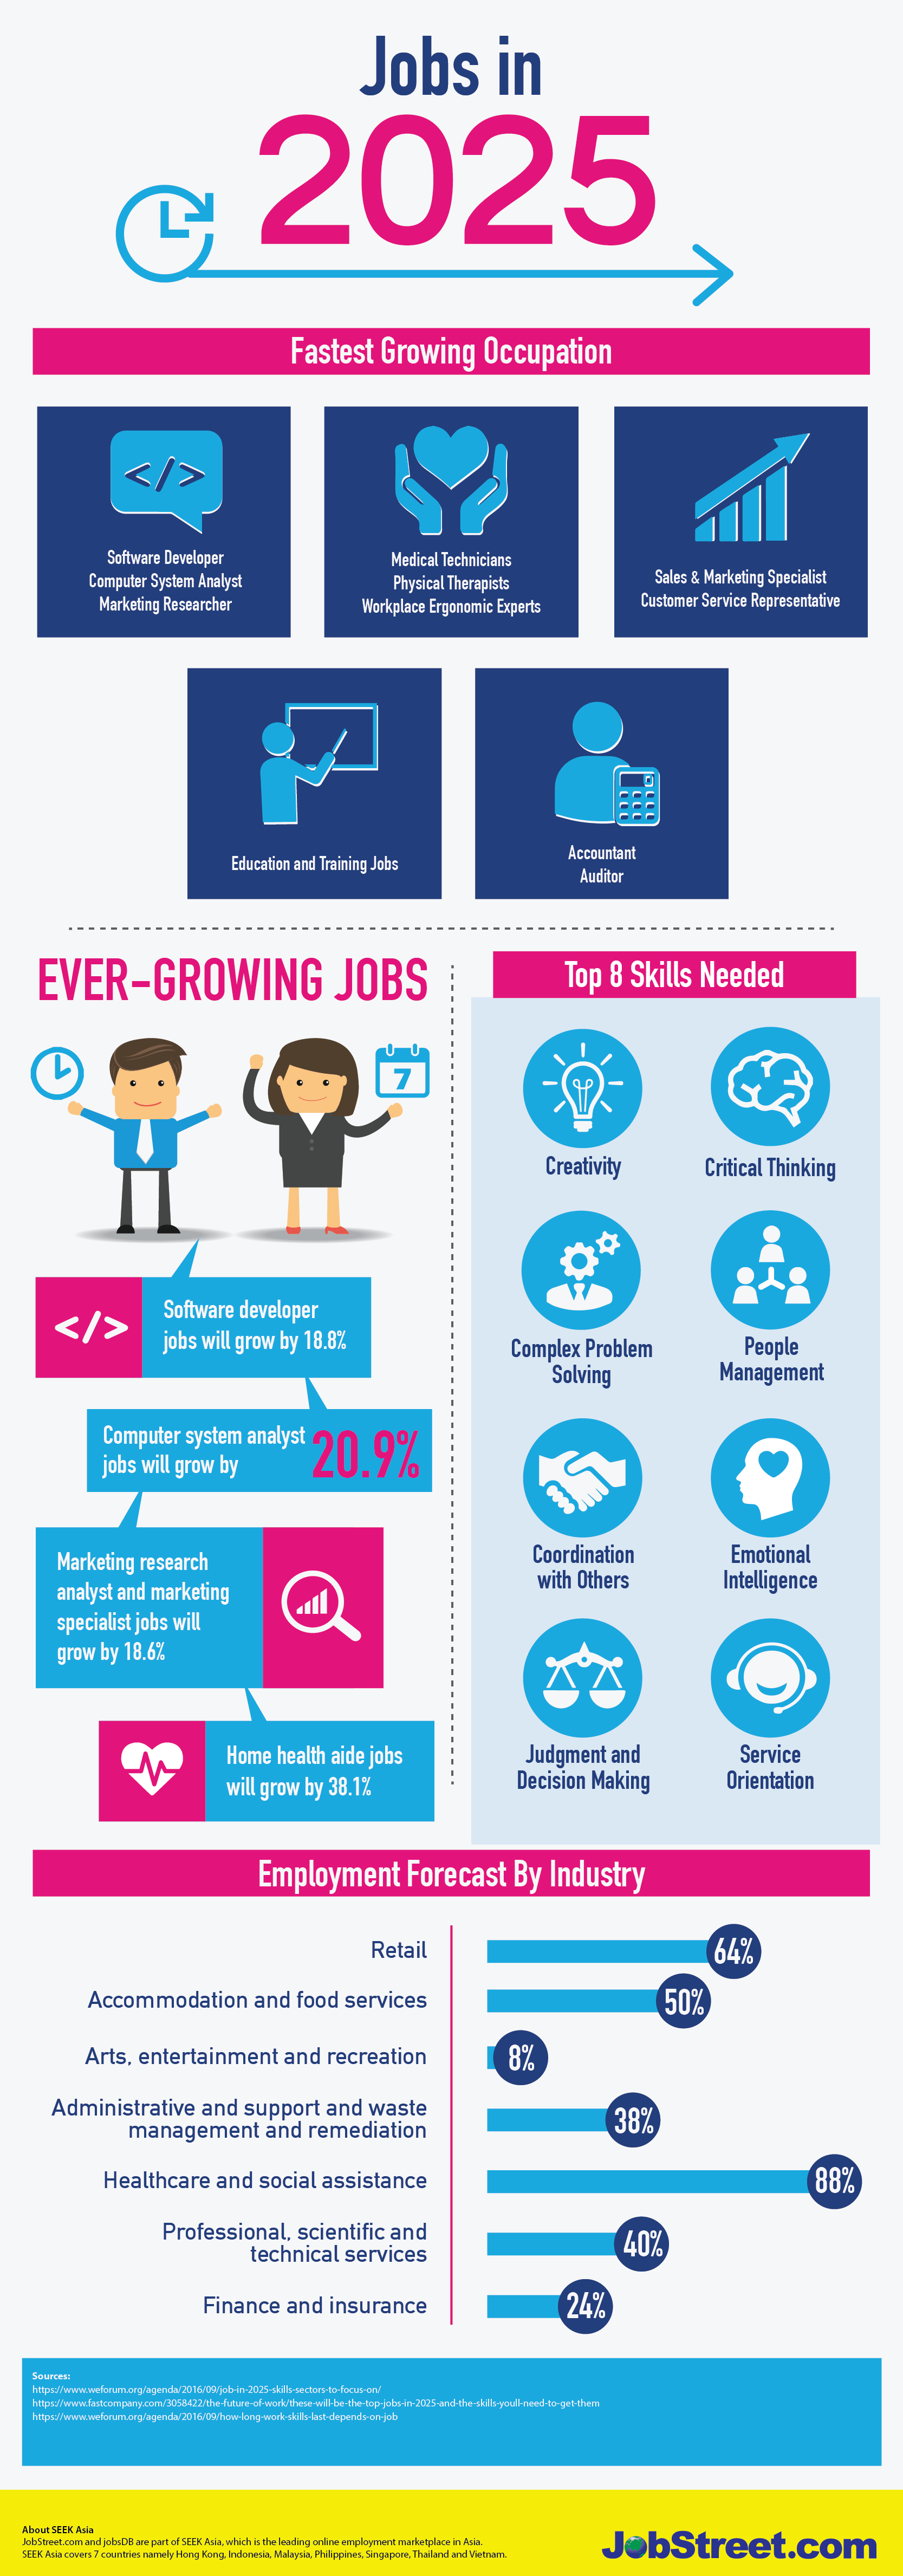 What Are The Future Jobs In Demand